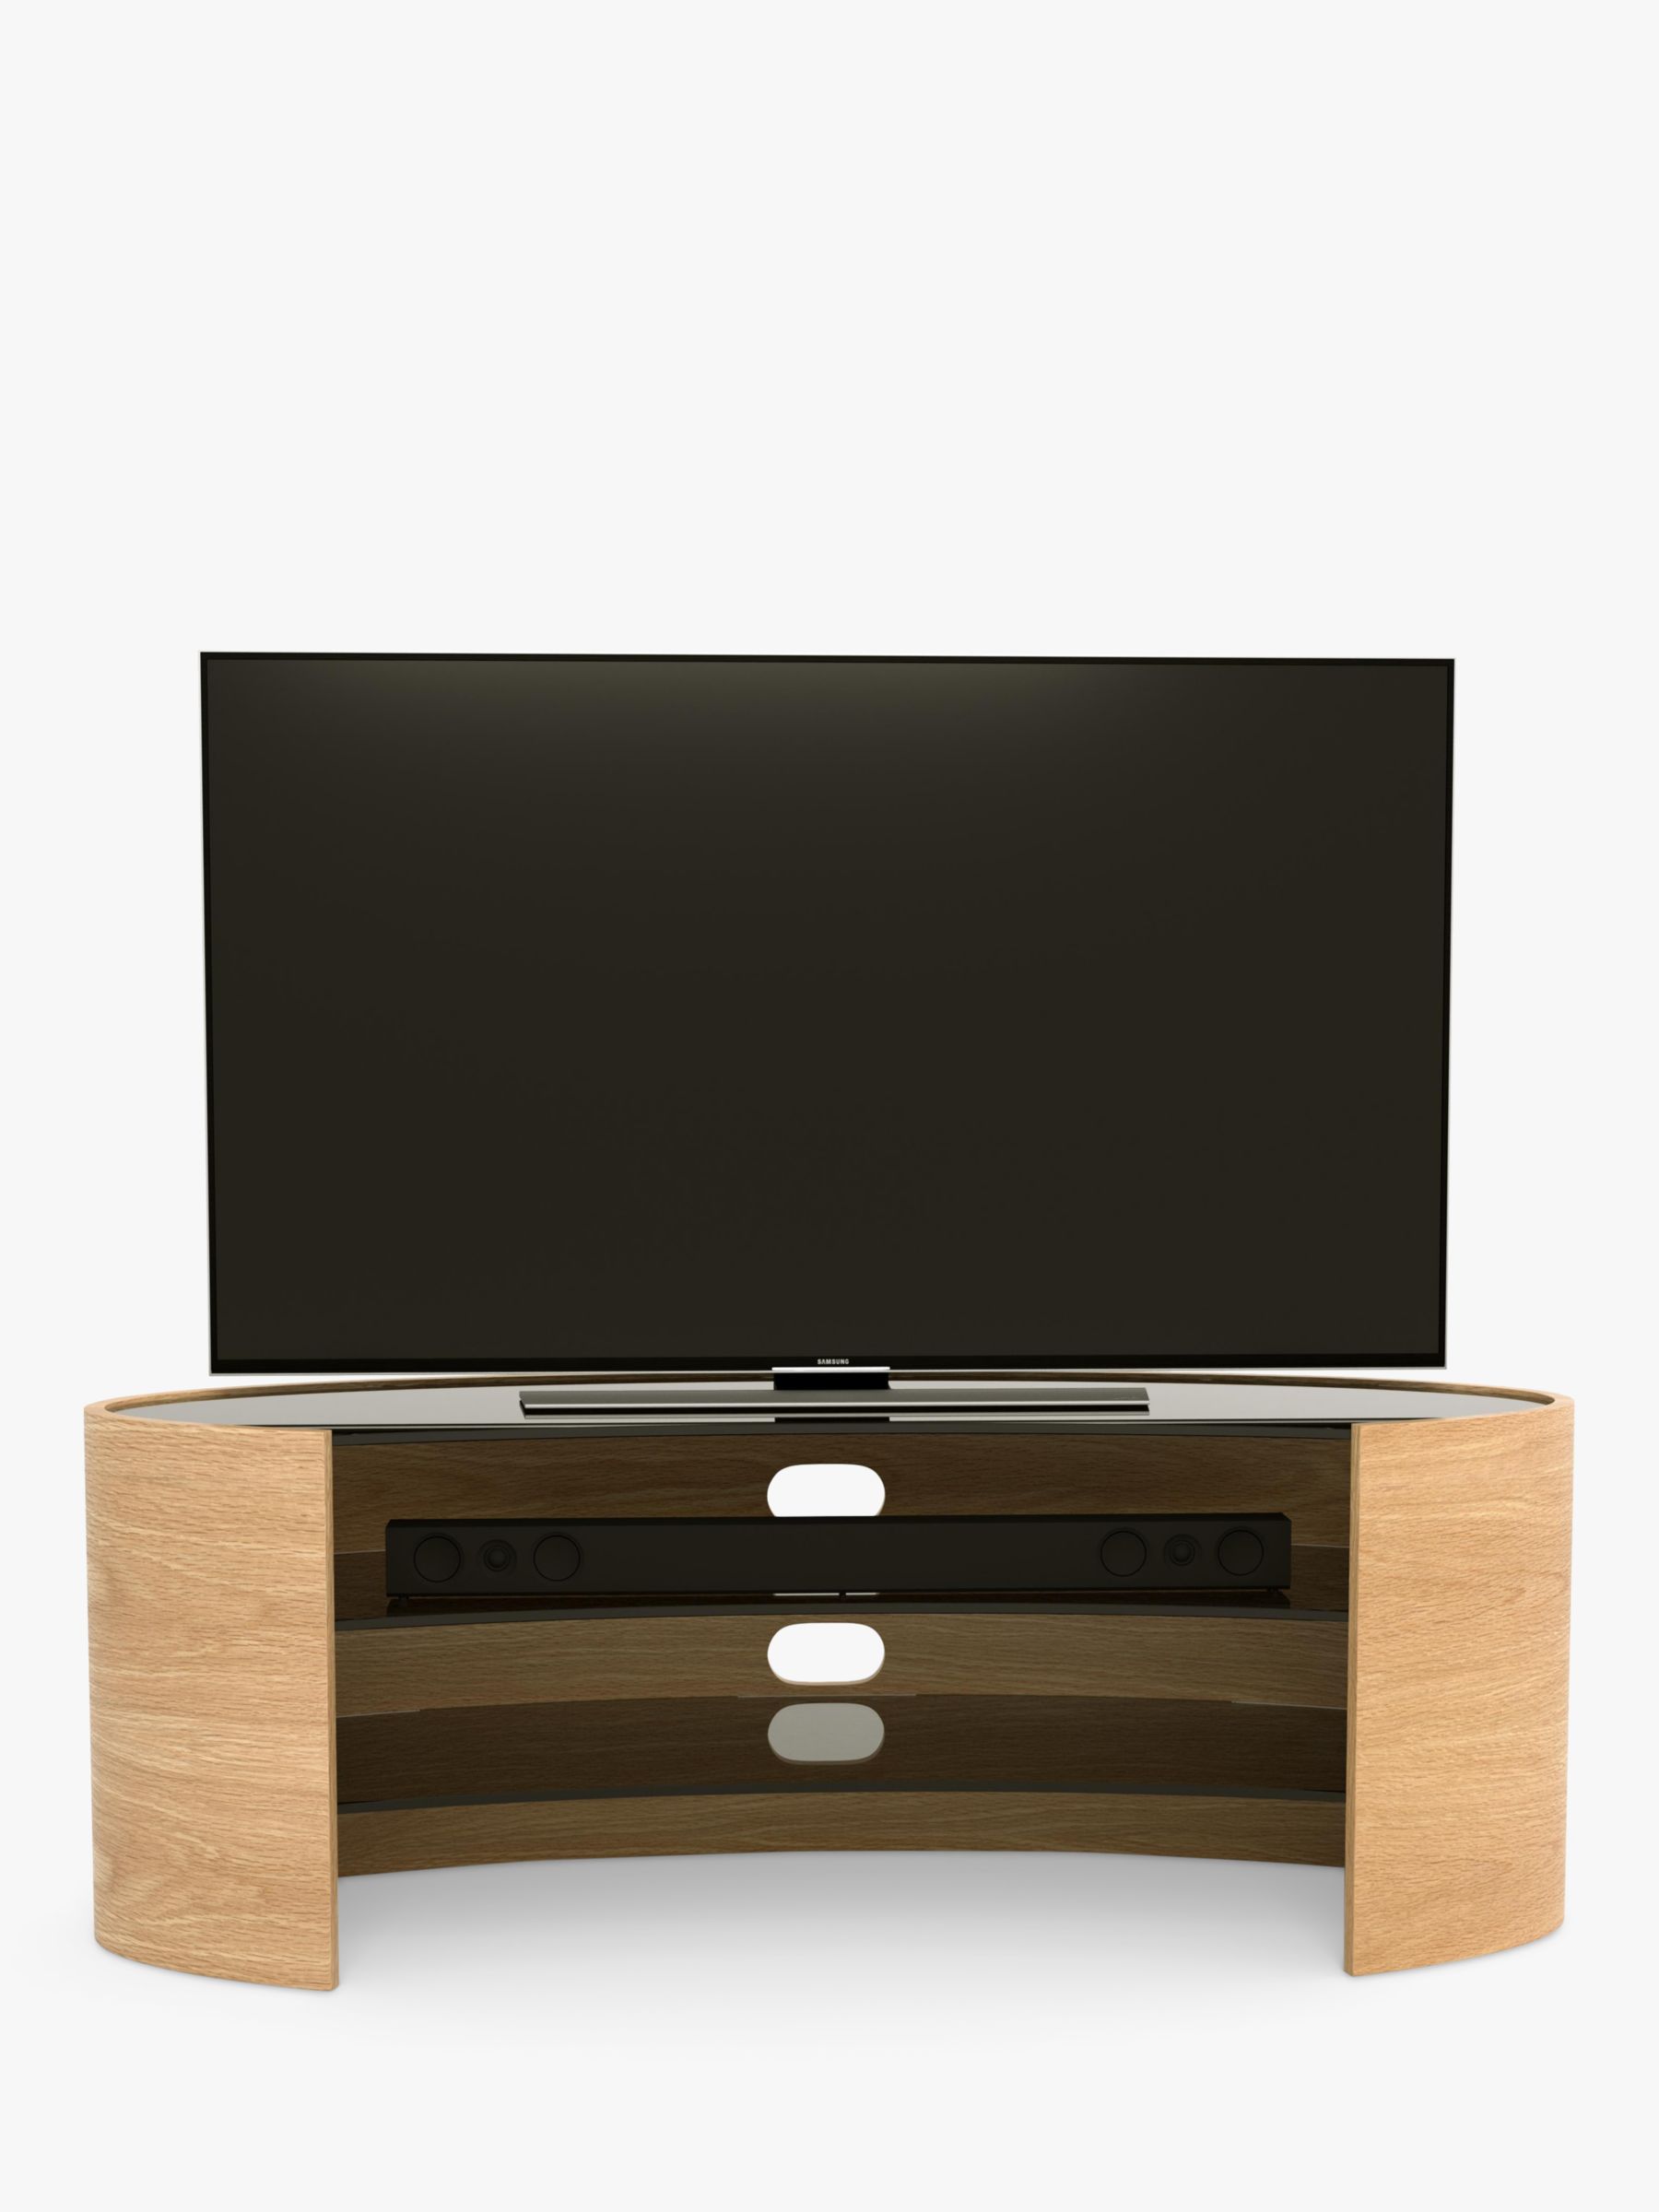 Photo of Tom schneider elliptical 1400 tv stand for tvs up to 60